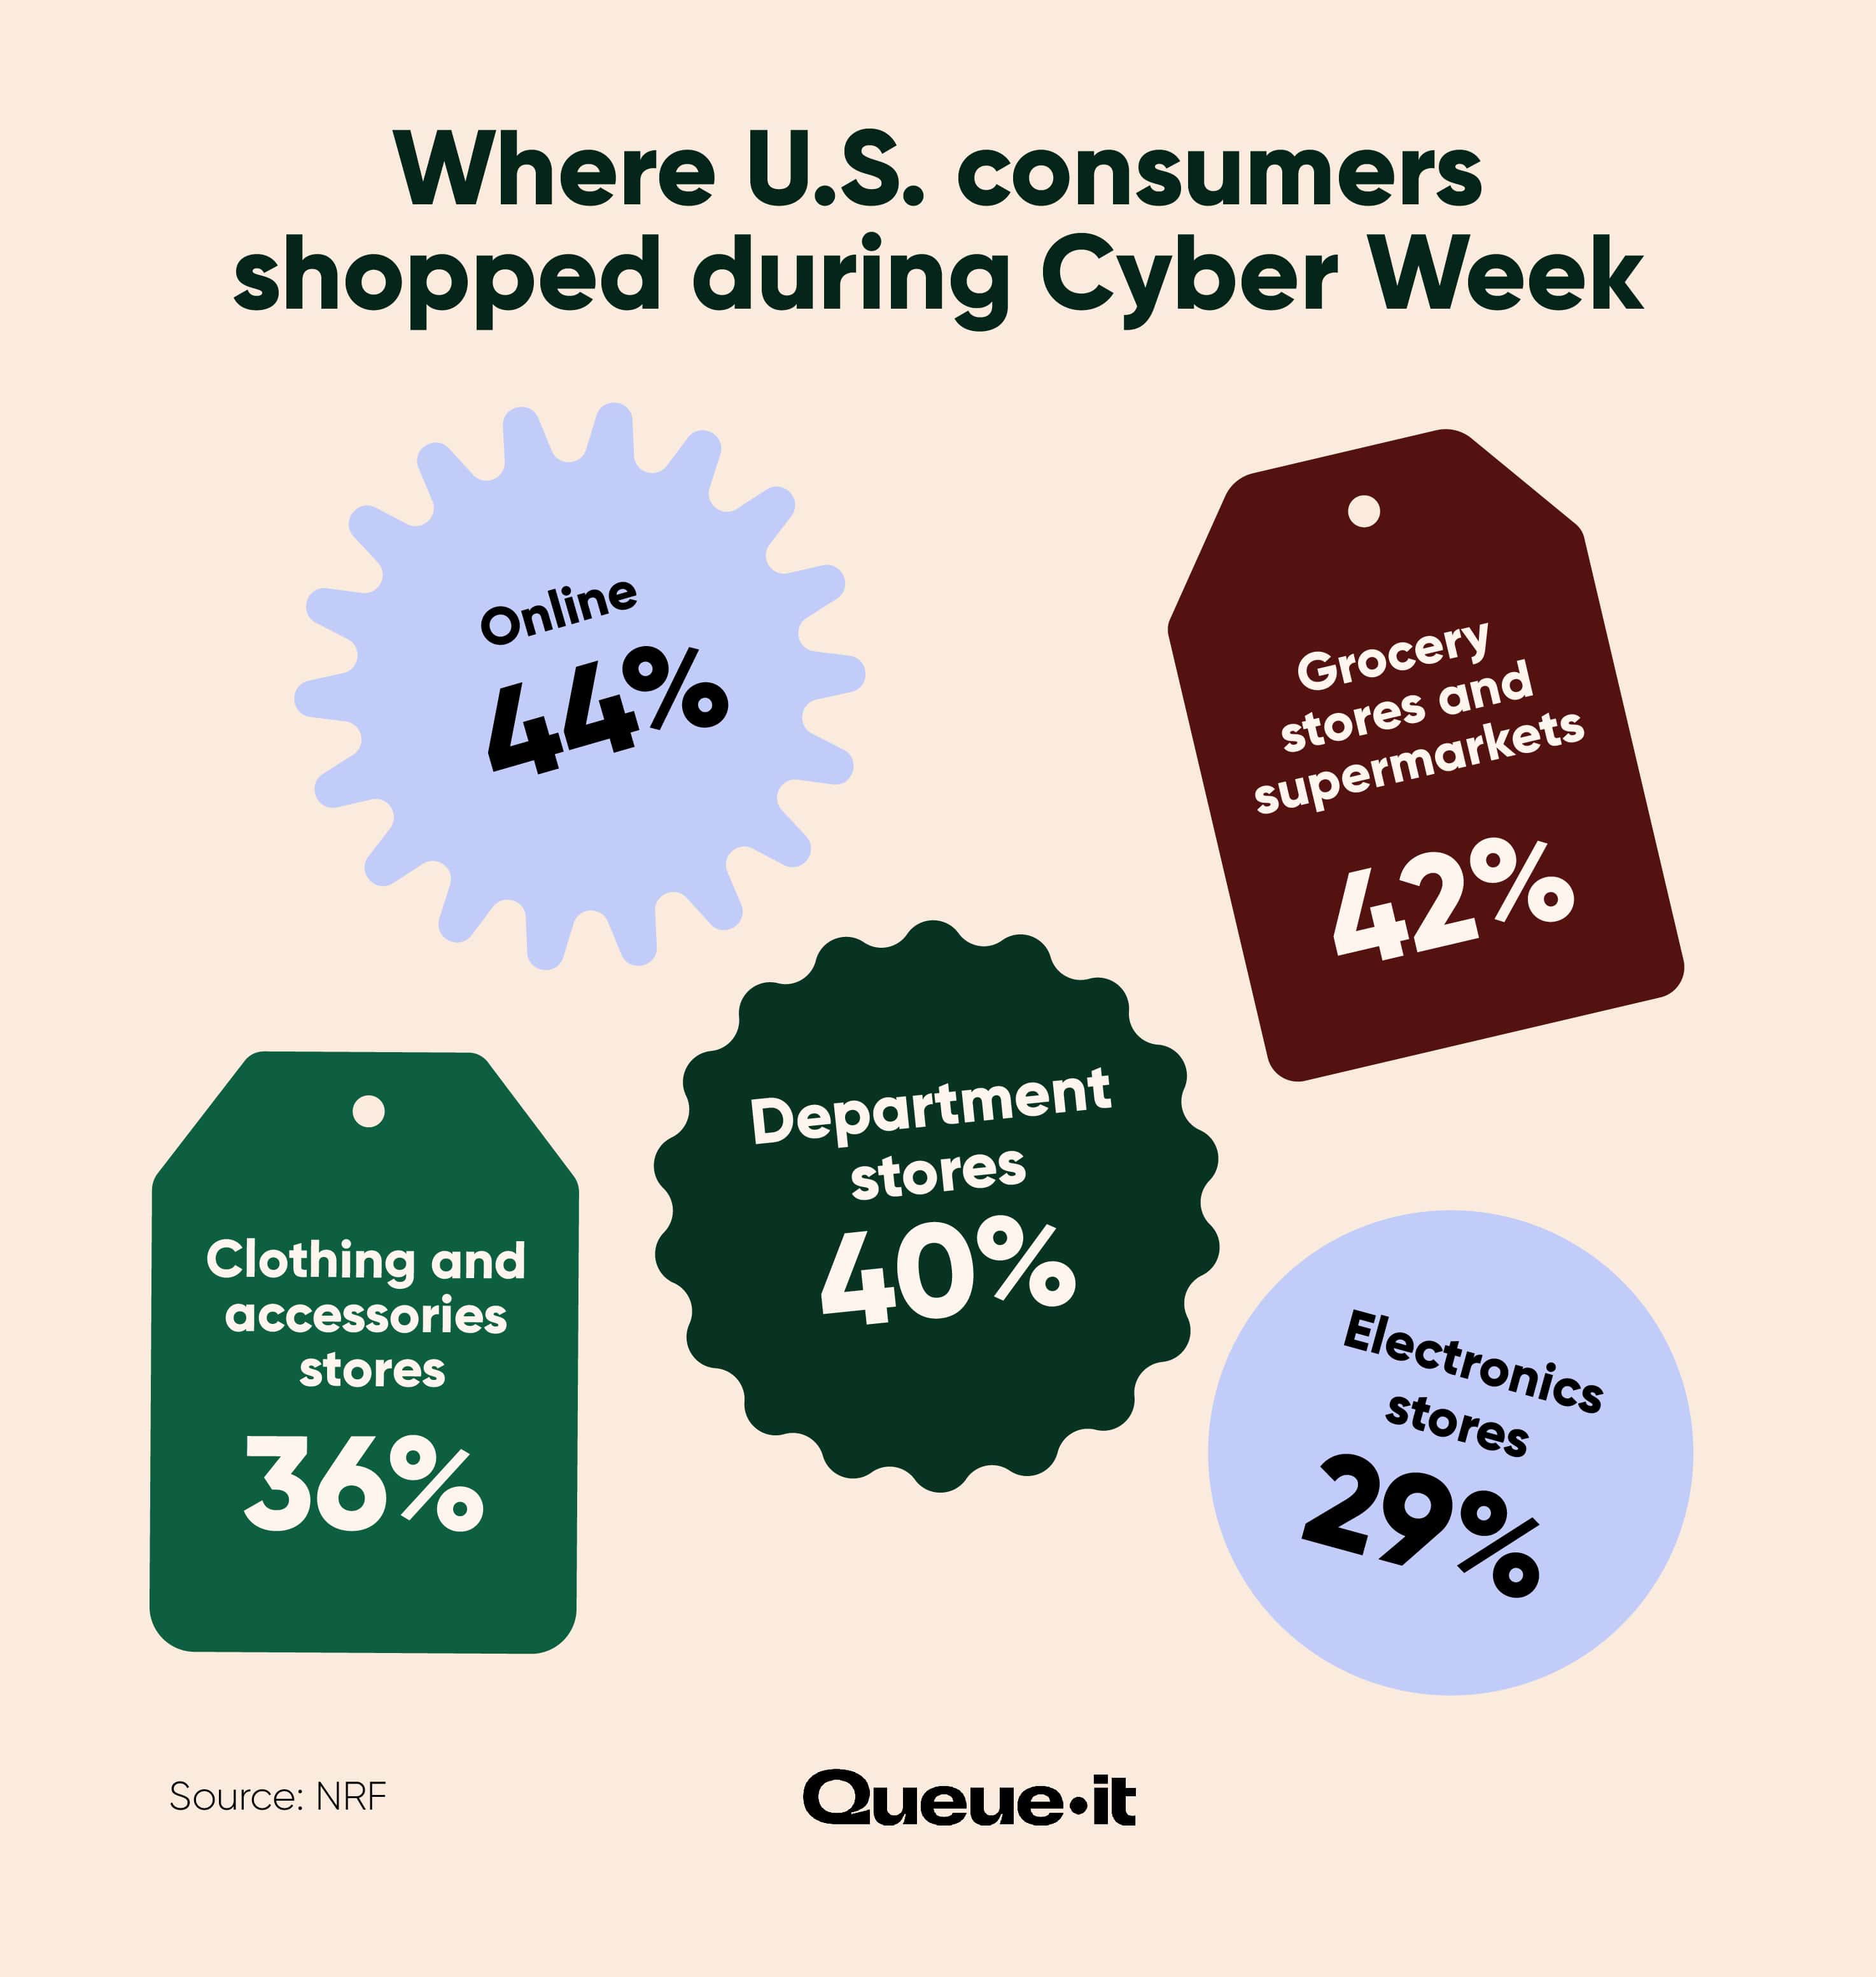 Top destinations for cyber week shoppers